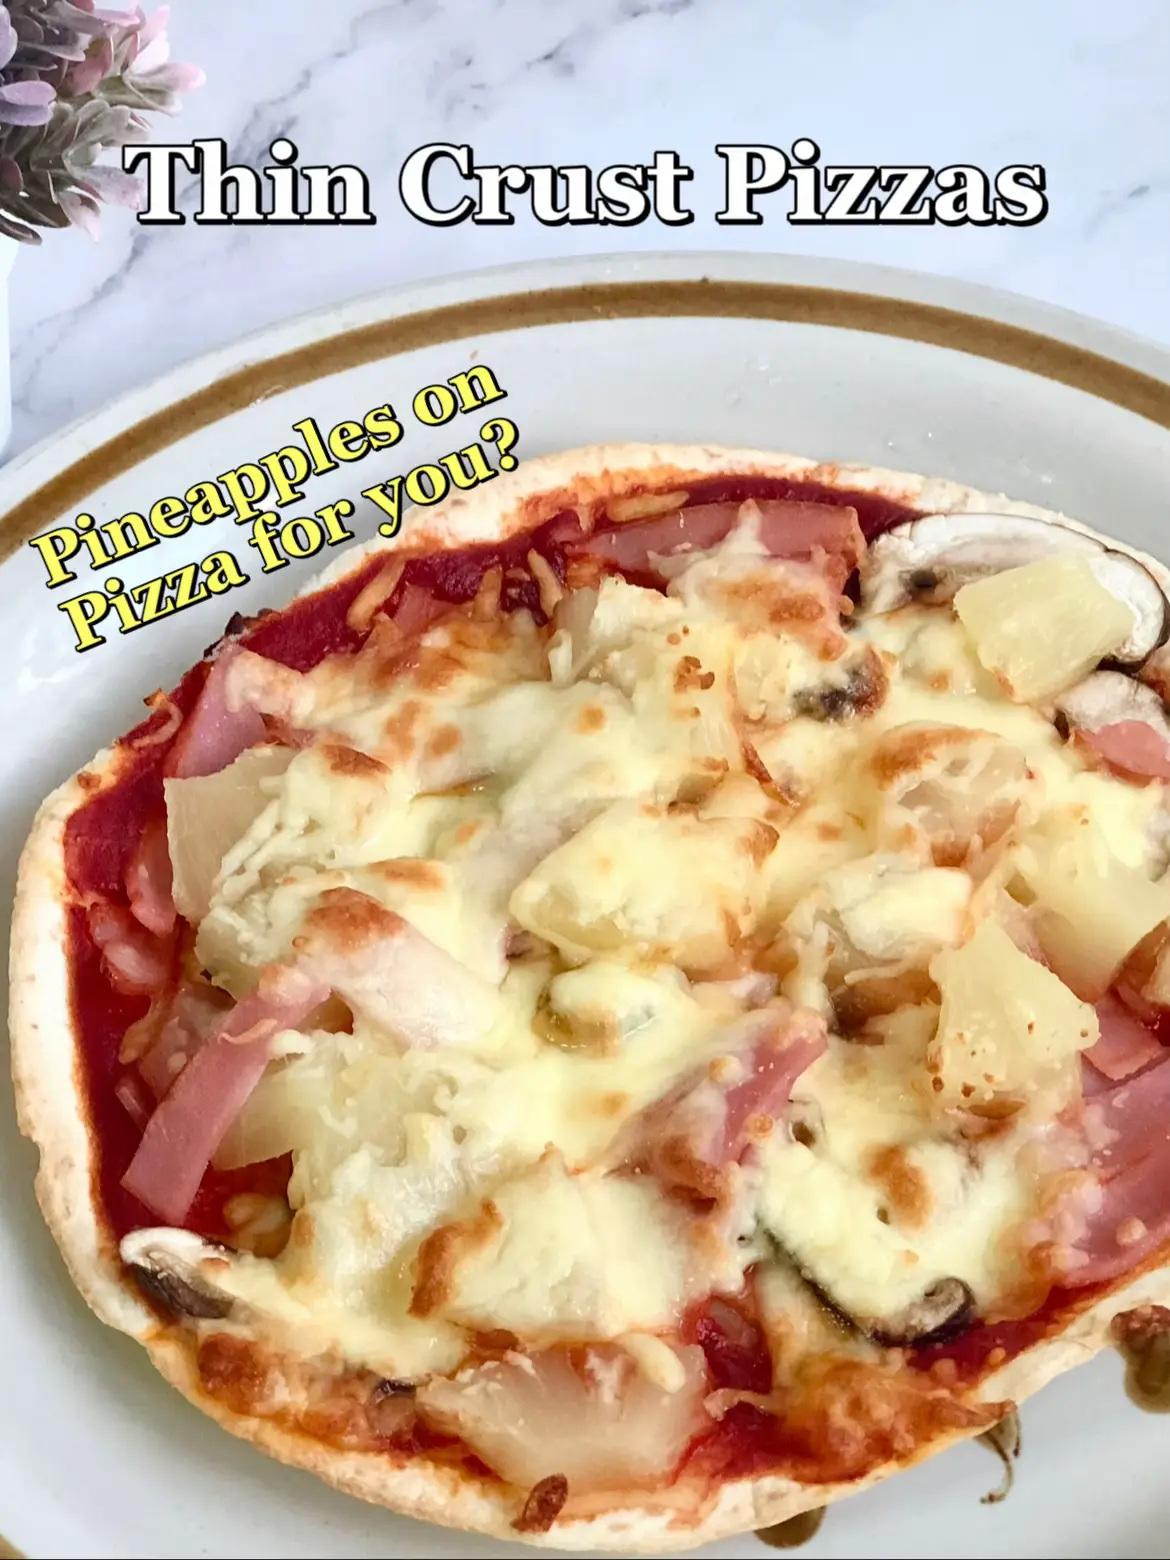 Is pineapple a YAY or NAY for you for pizza? F's images